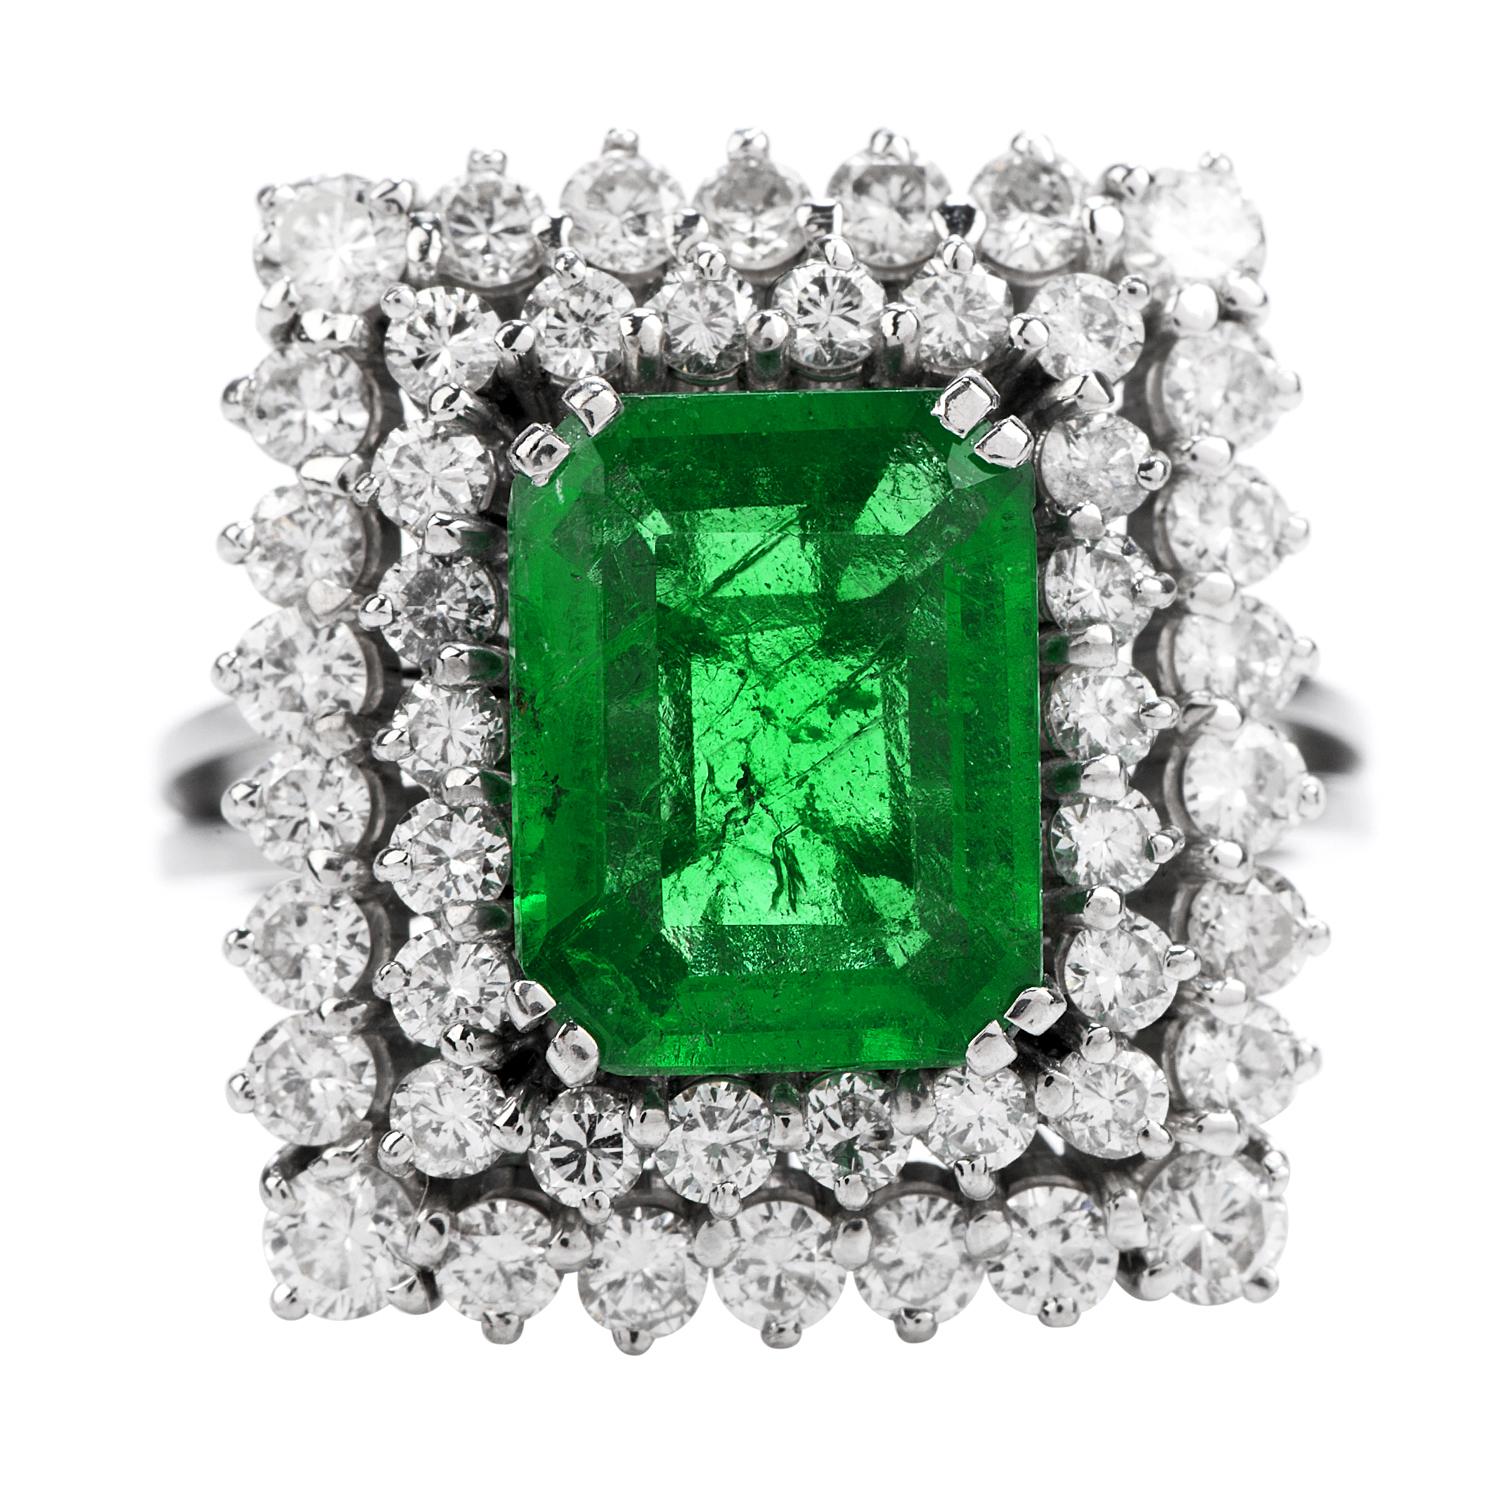 This Art Deco Inspired Design, Rectangular Shaped Cocktail Ring,

has the perfect balance between sparkle and Deep color!

It is crafted in solid Platinum.

With an AGL Certified Colombian Emerald of 2.48 carats in the center, 

with No treatments